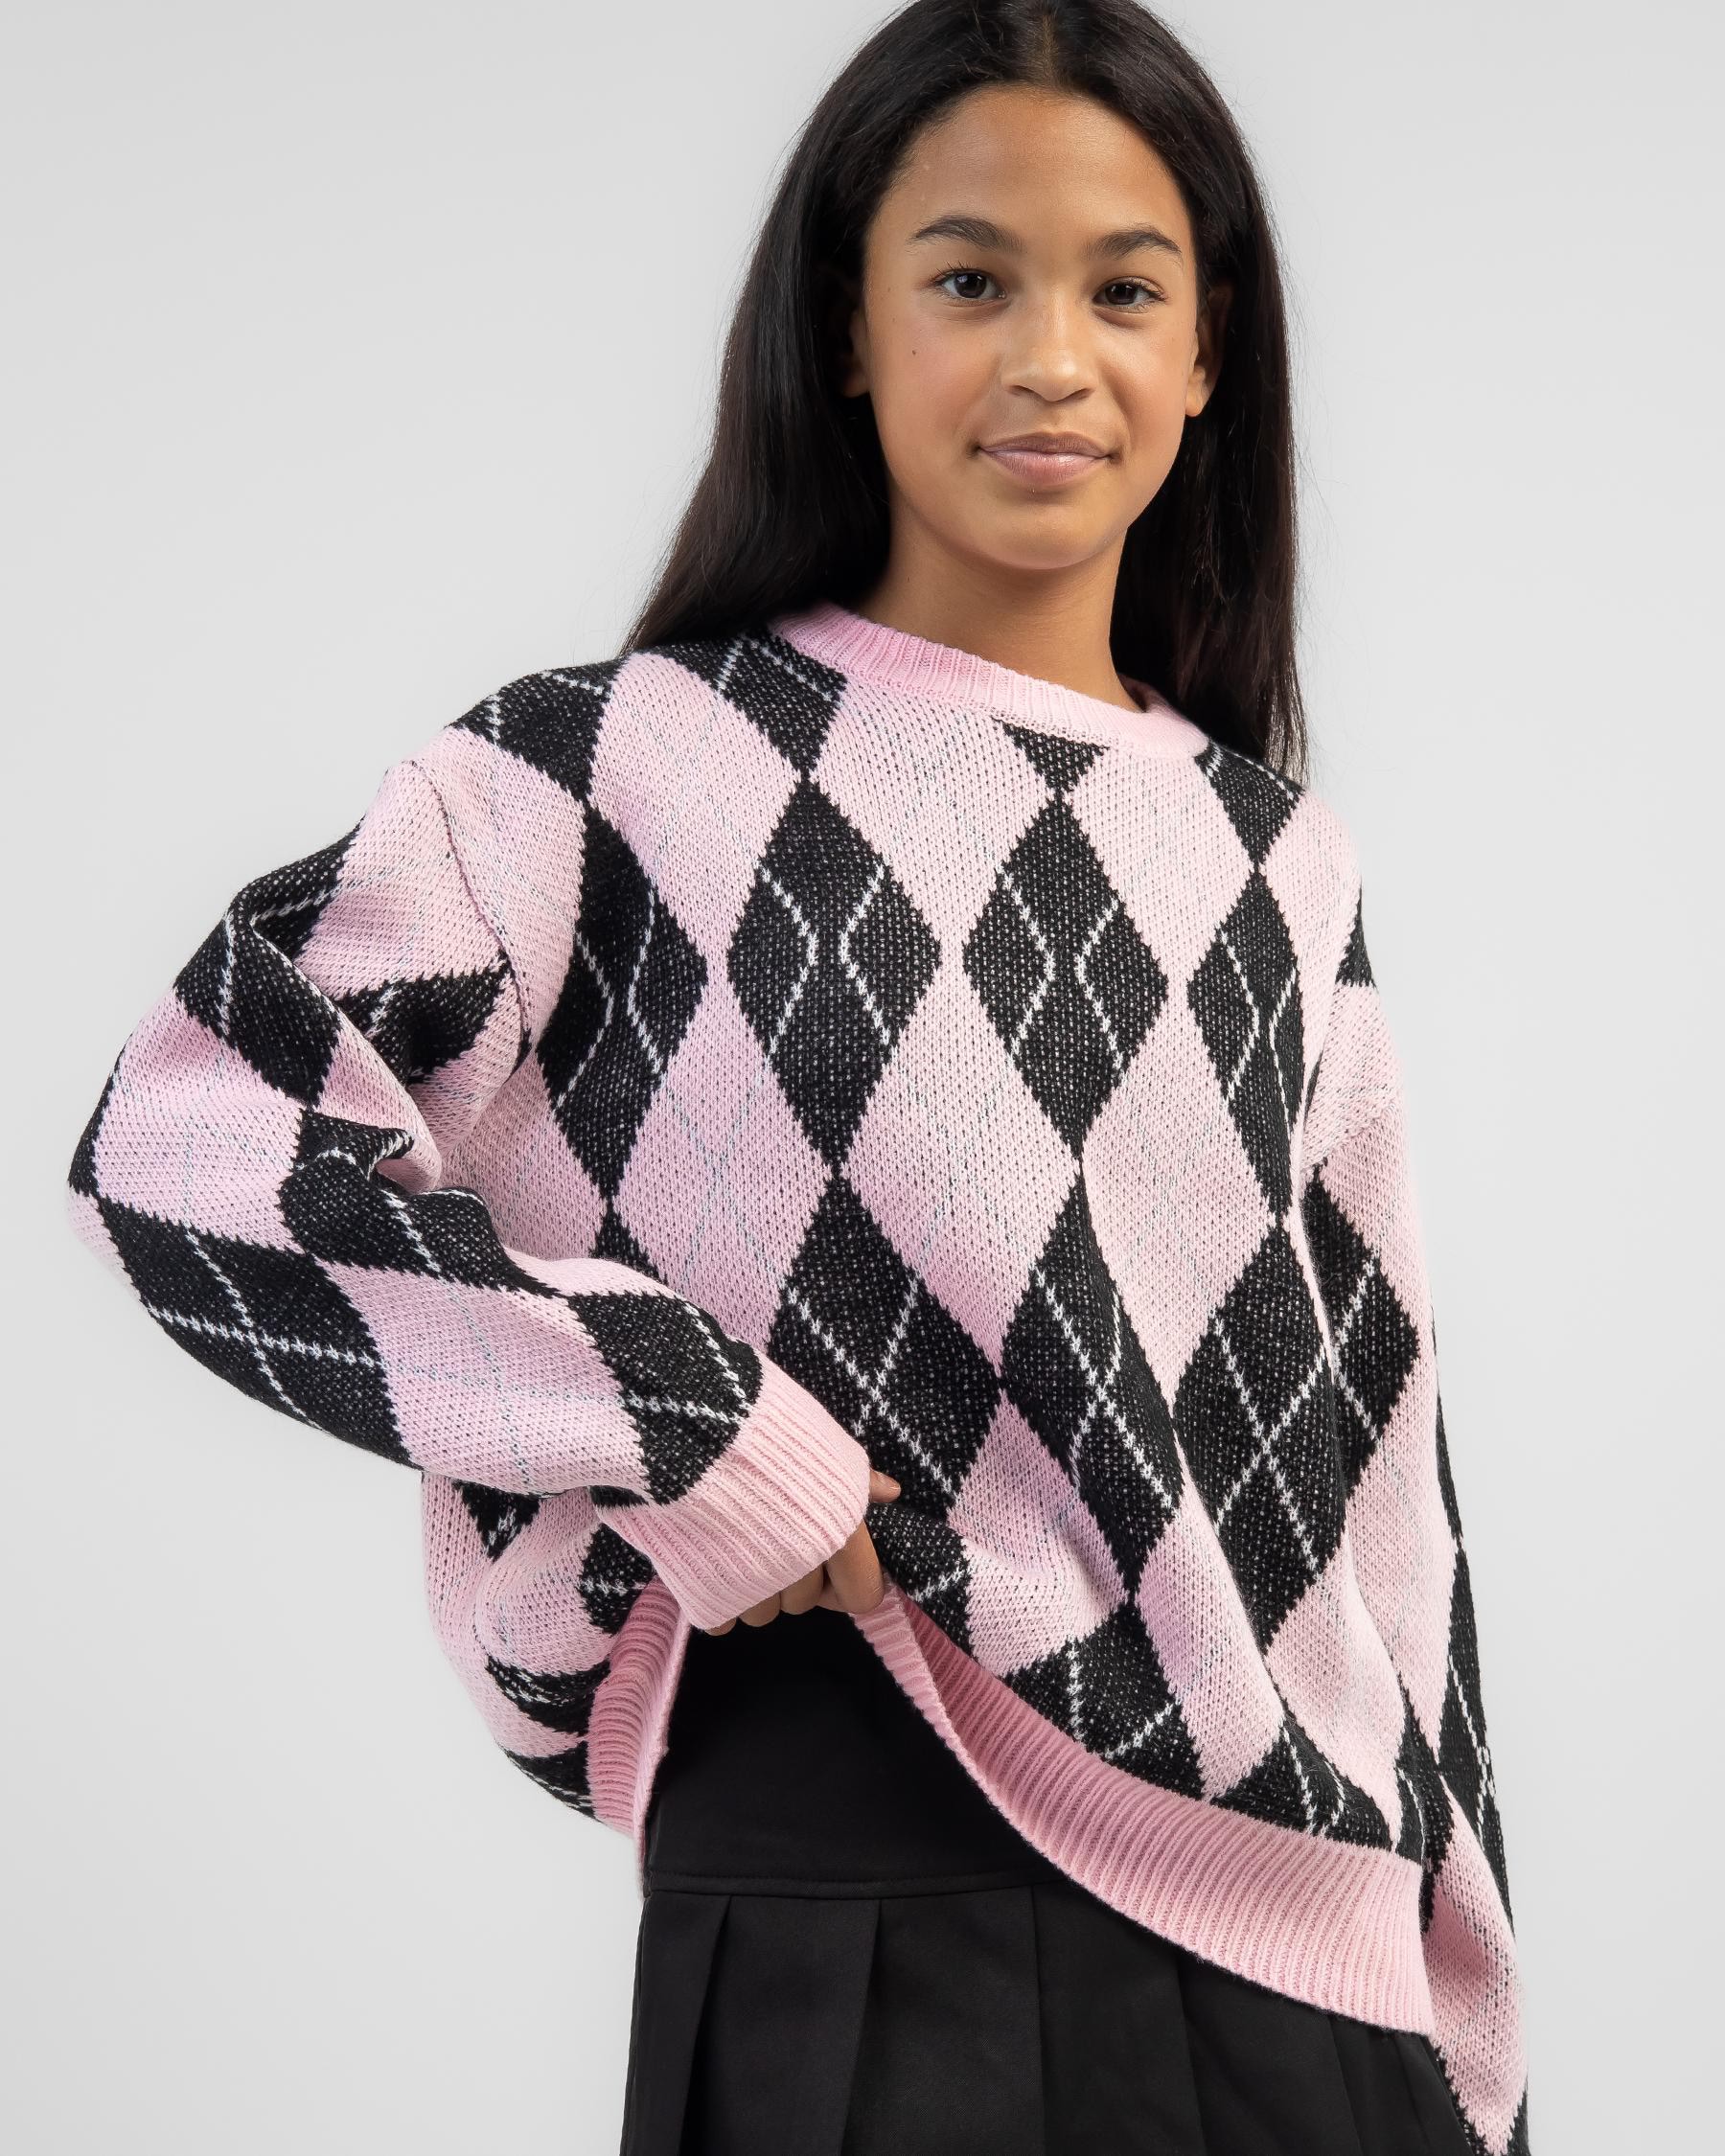 Ava And Ever Girls' Harvard Argyle Knit Jumper In Black/pink/white - FREE*  Shipping & Easy Returns - City Beach United States